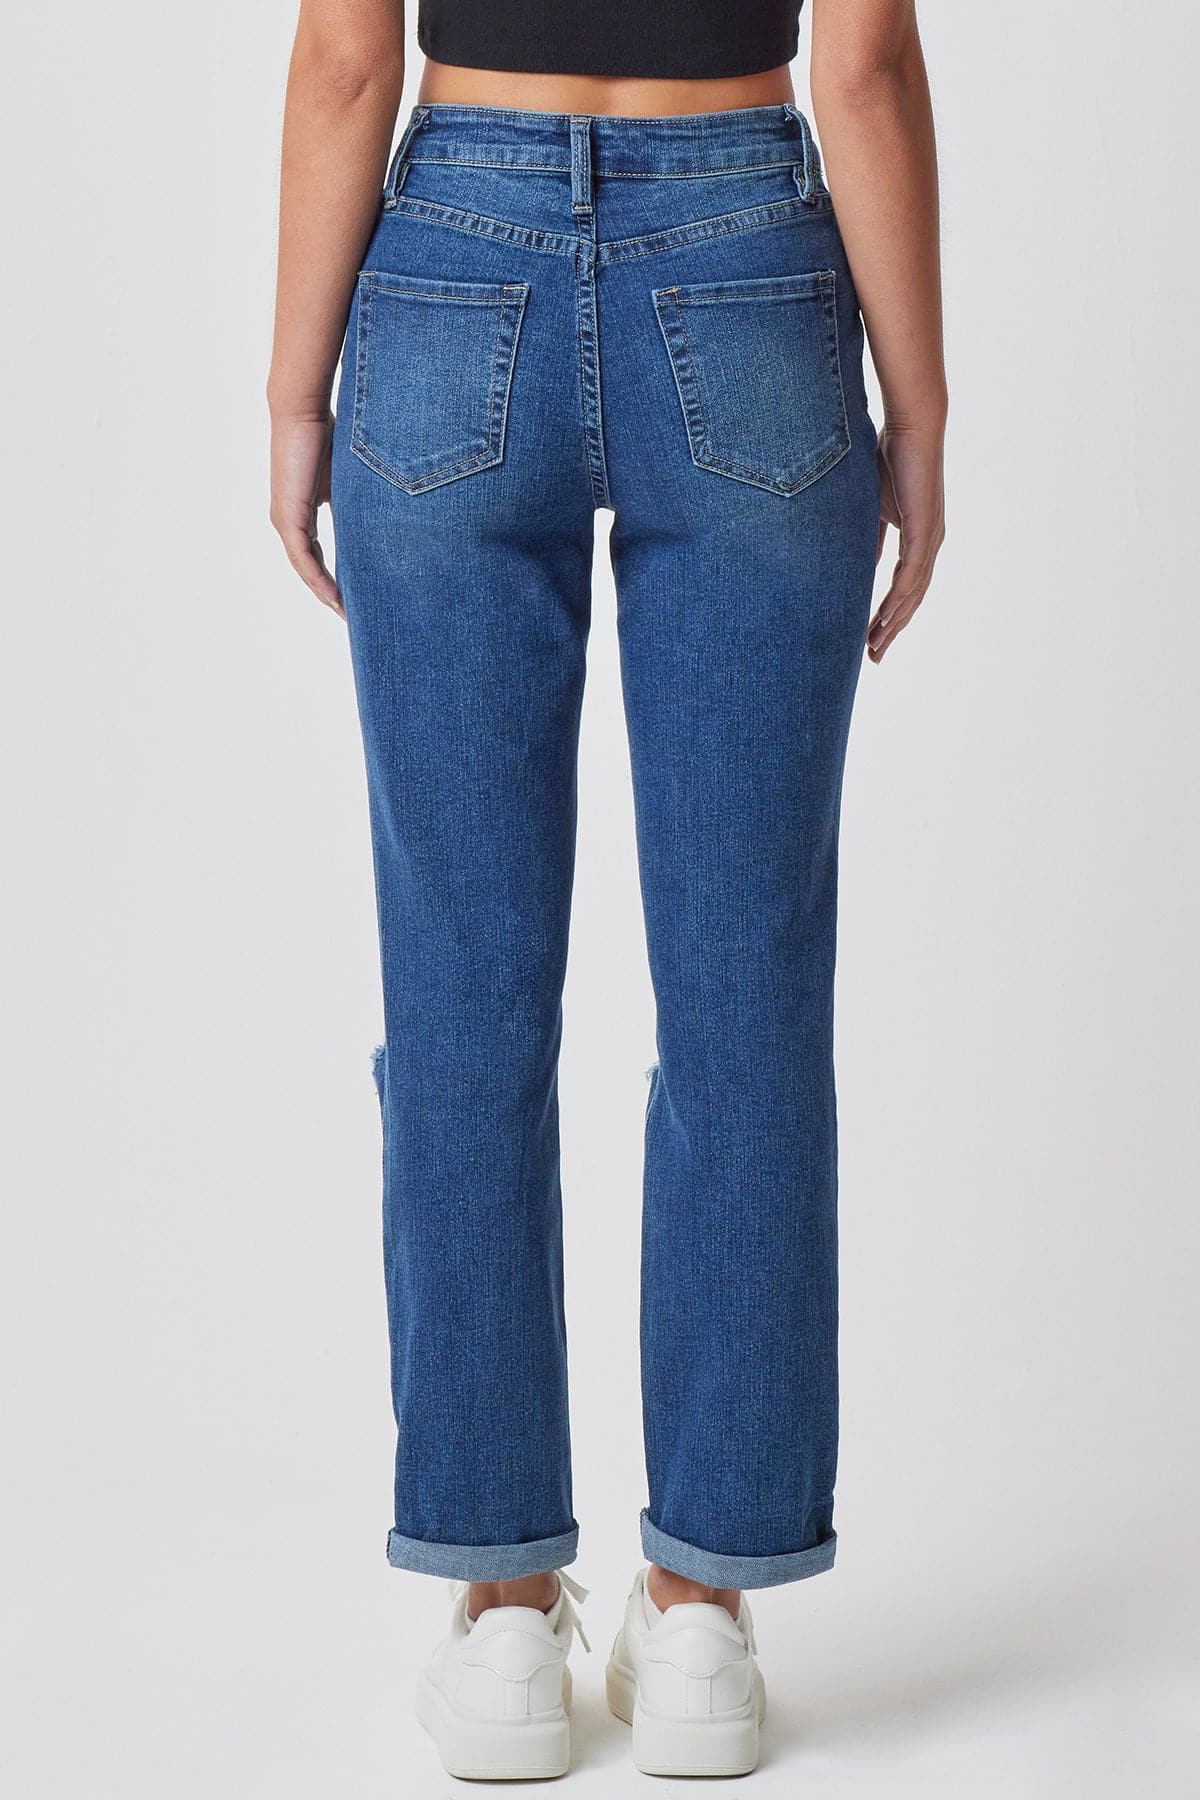 Women's Hybrid Dream Mom Fit Ankle Jeans-Sale